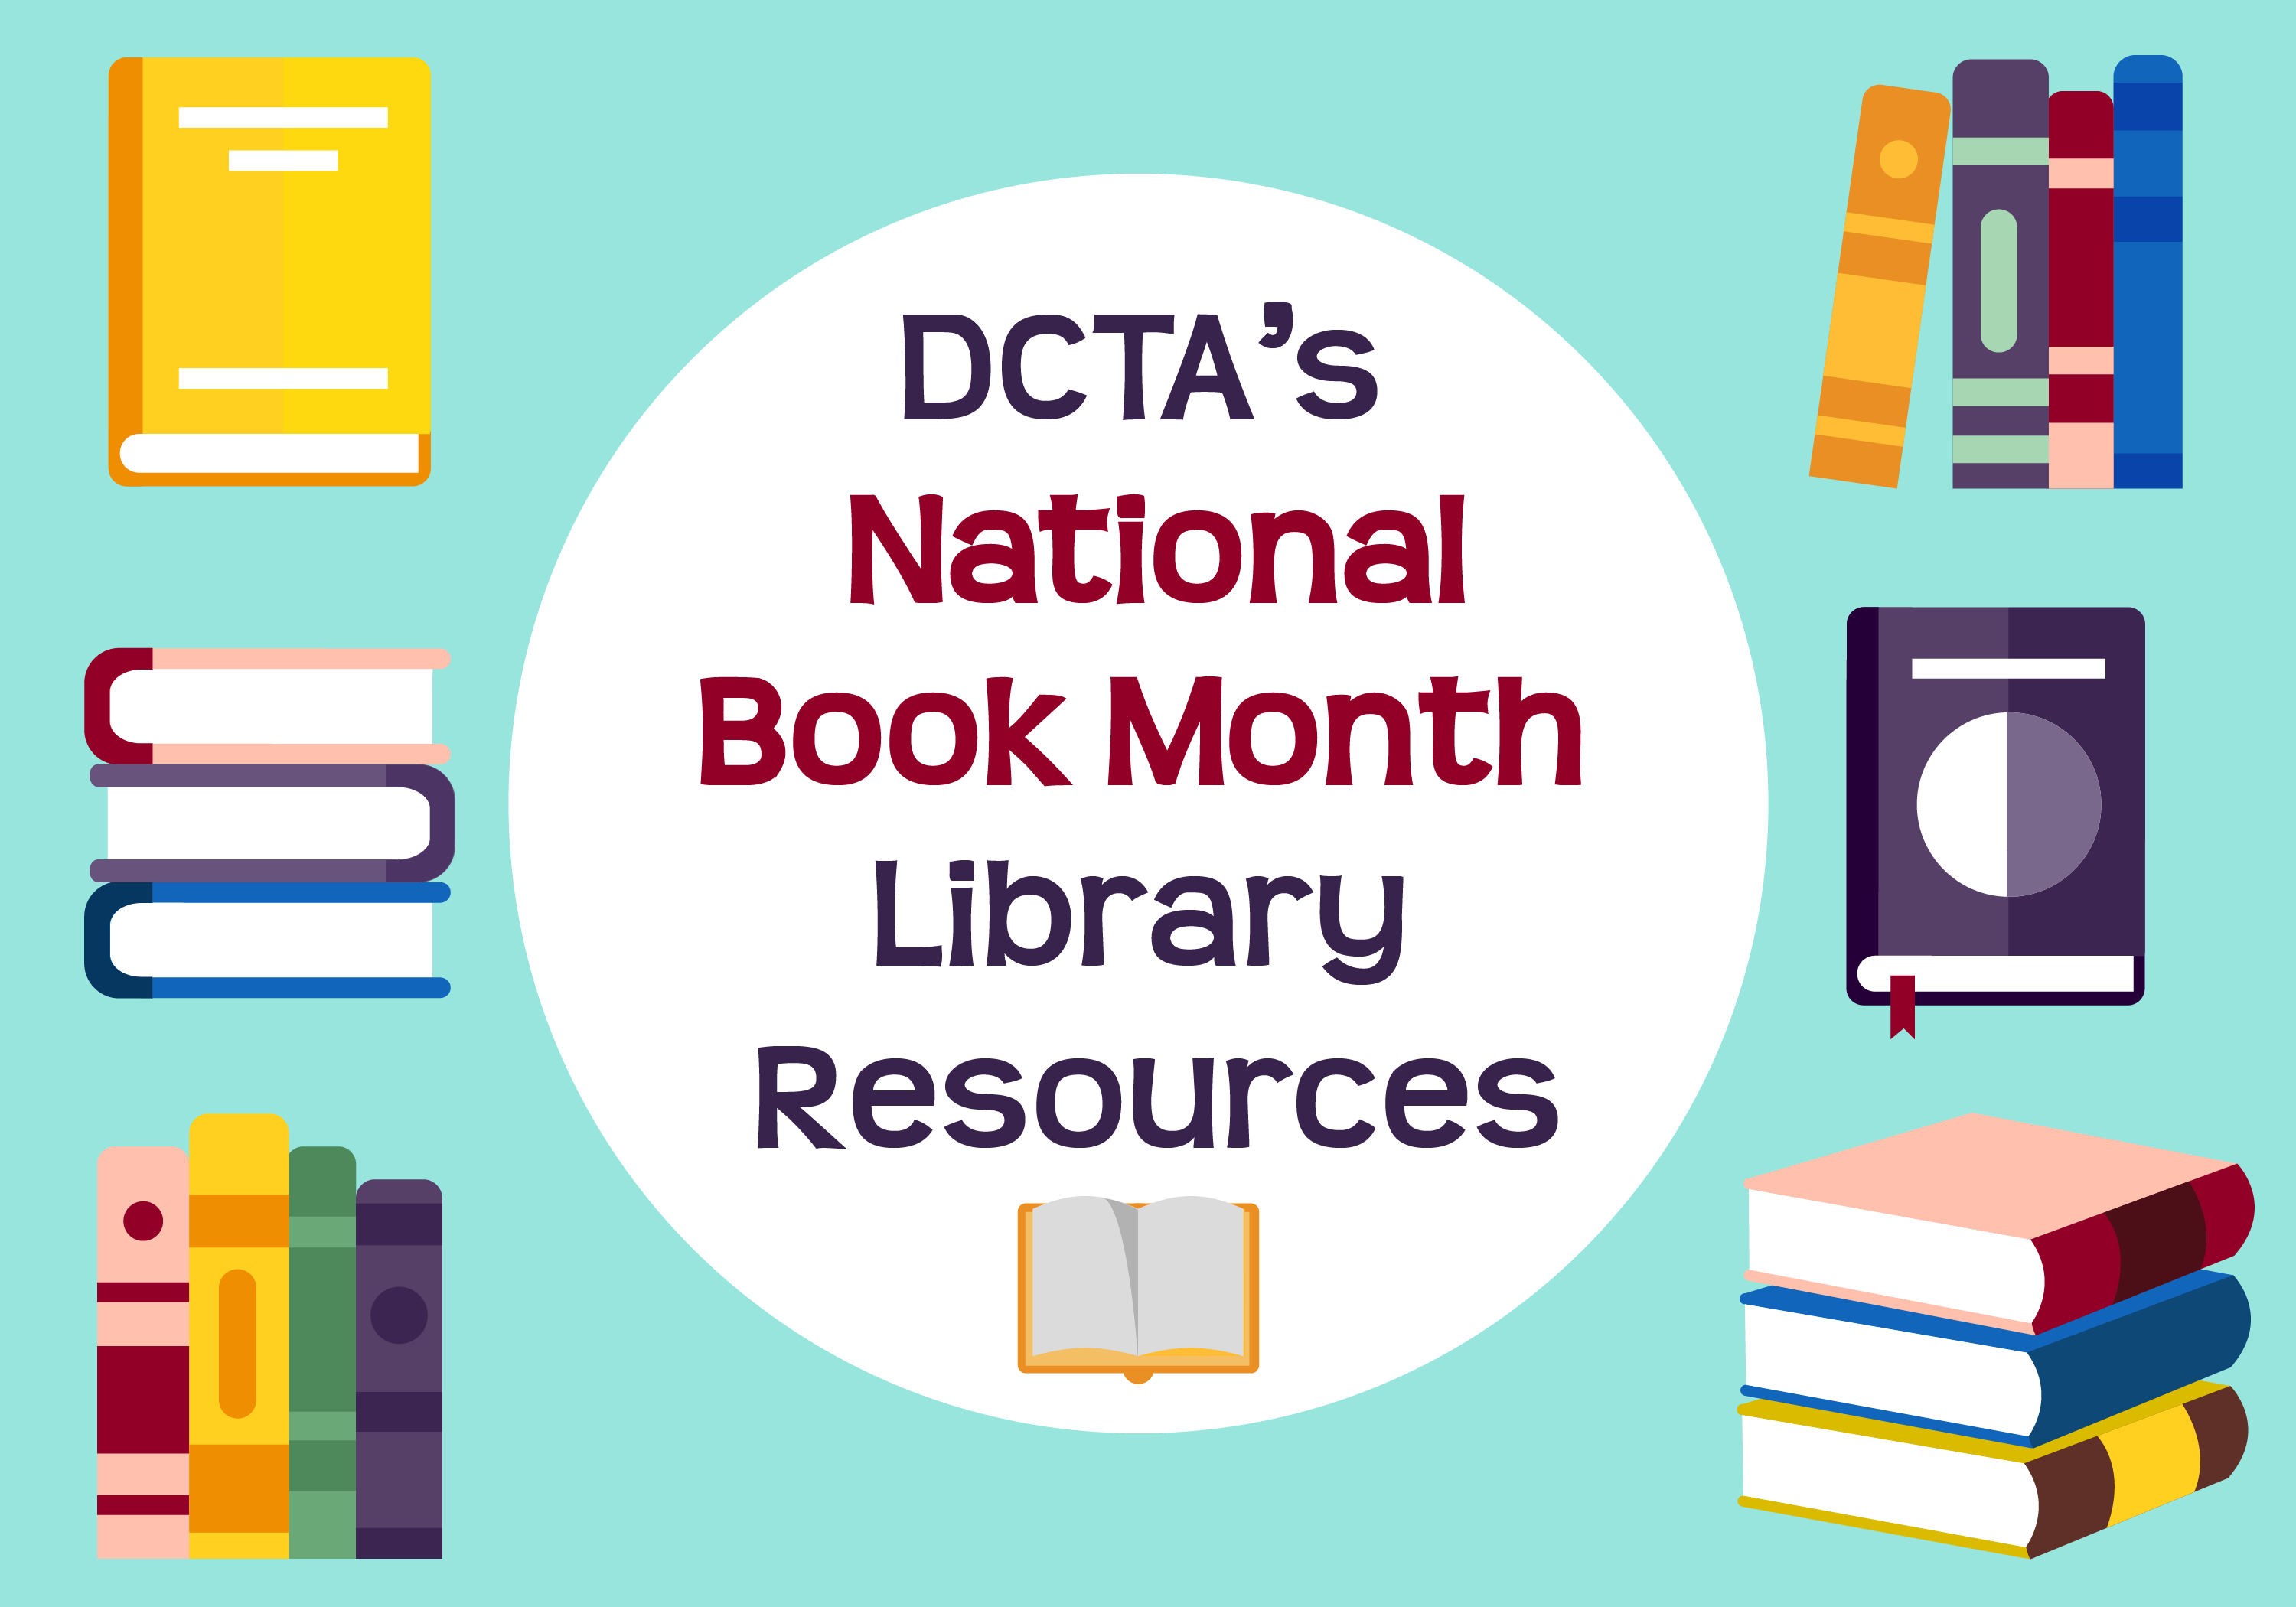 DCTA's National Book Month Library Resources